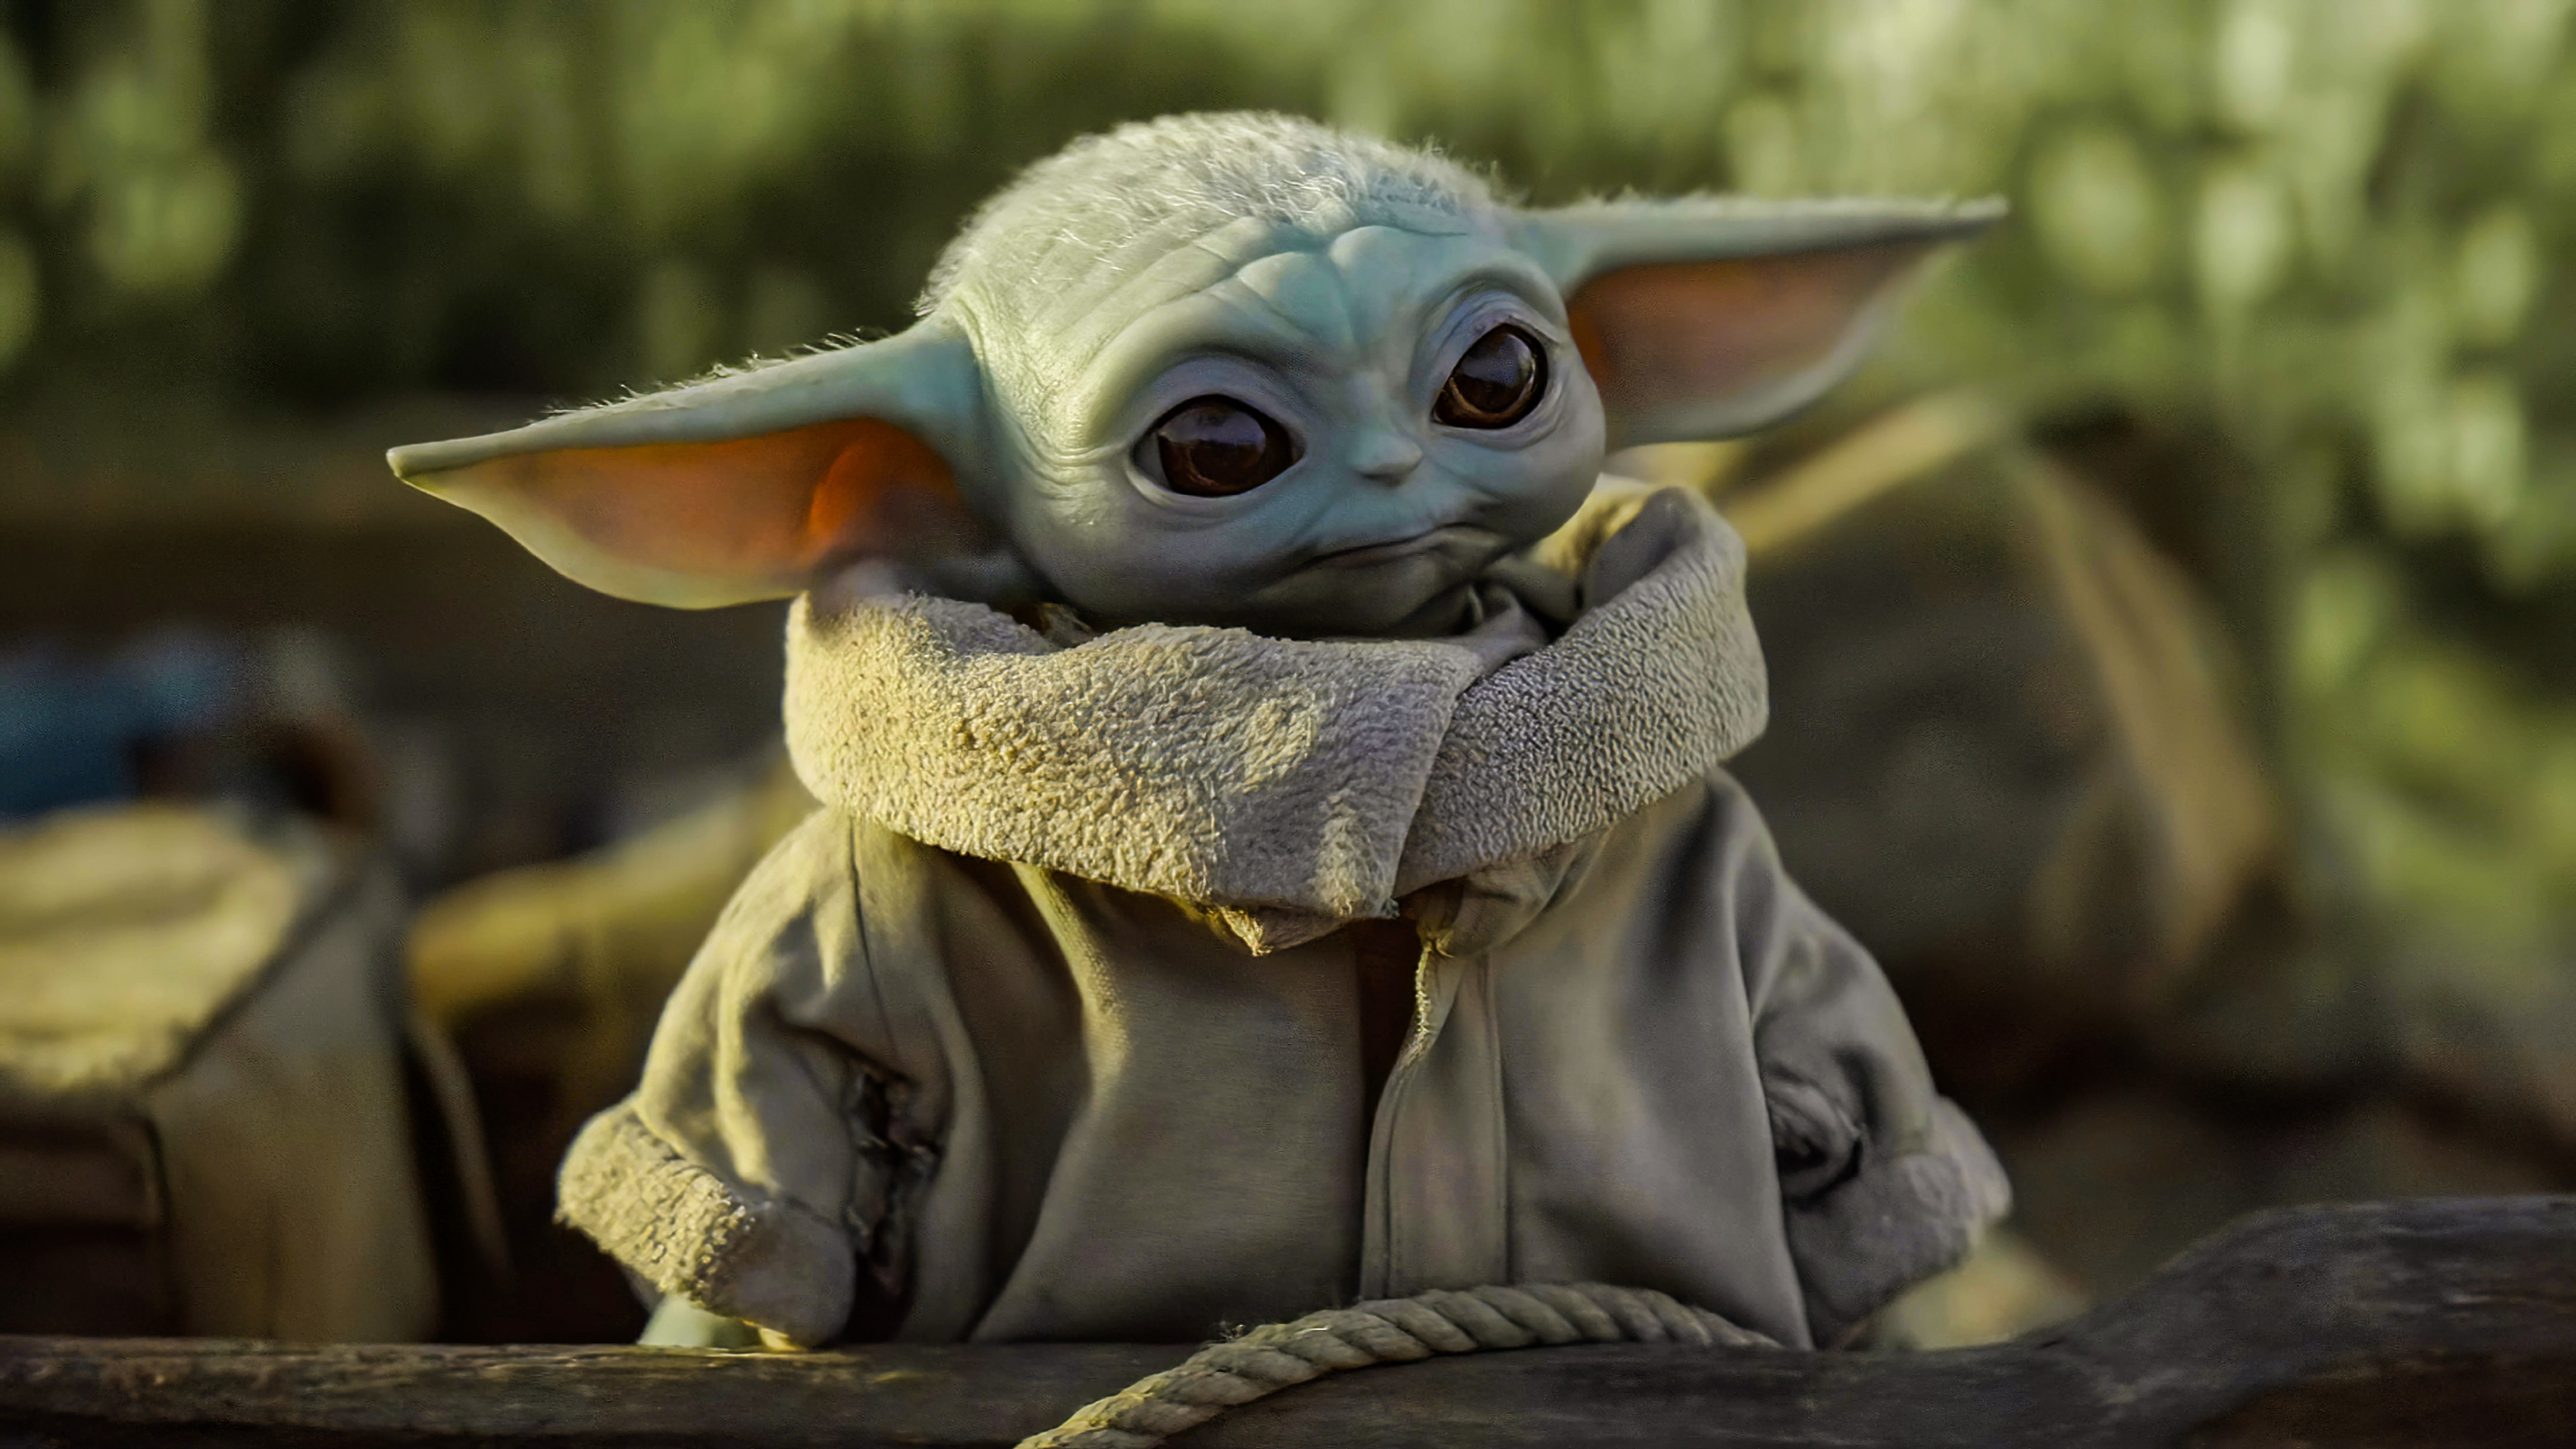 51x Star Wars Baby Yoda 2 5k Wallpaper Hd Tv Series 4k Wallpapers Images Photos And Background Wallpapers Den